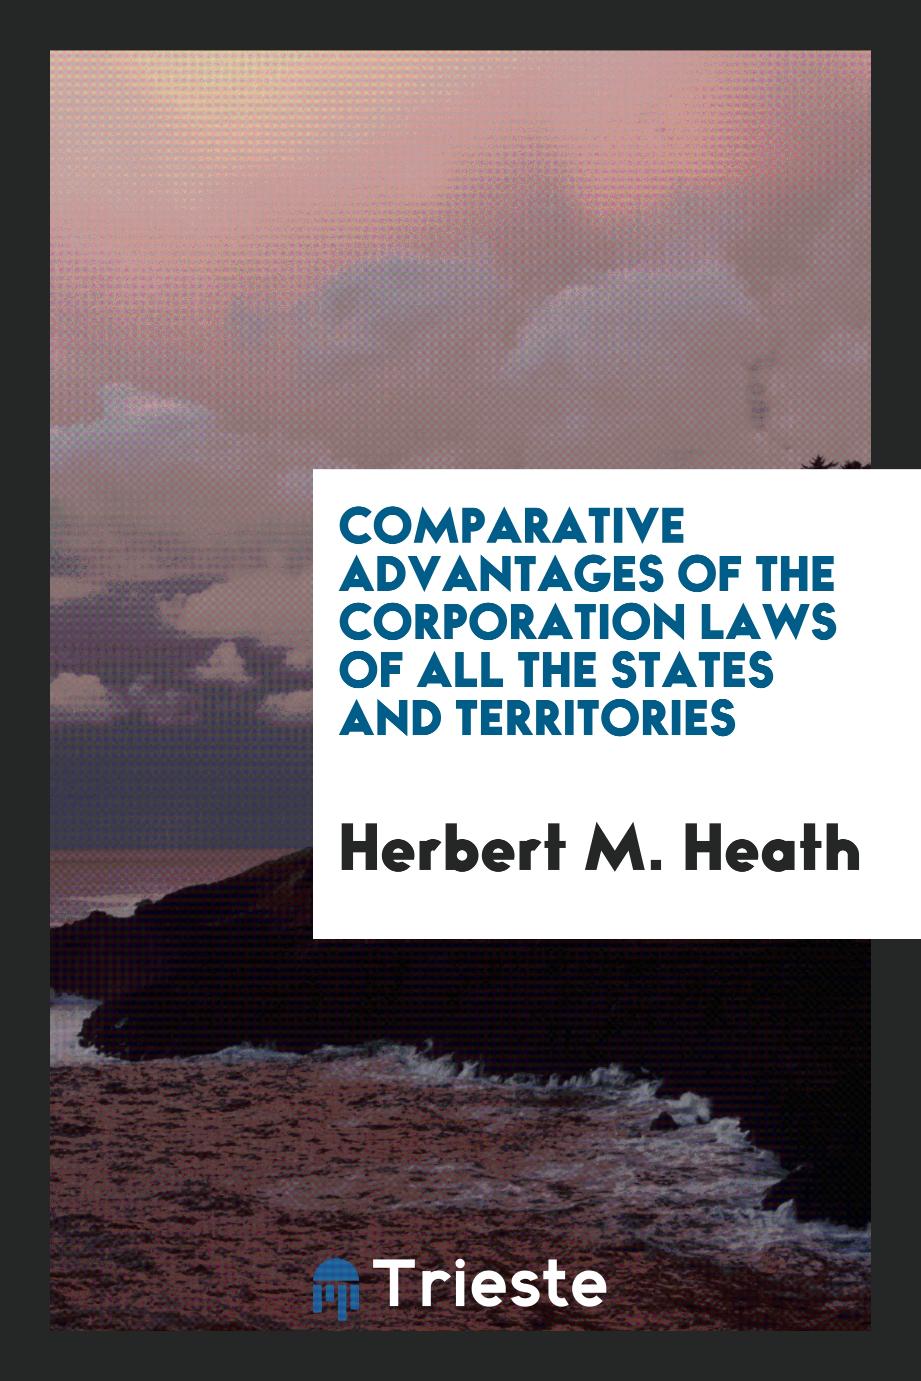 Comparative Advantages of the Corporation Laws of All the States and Territories